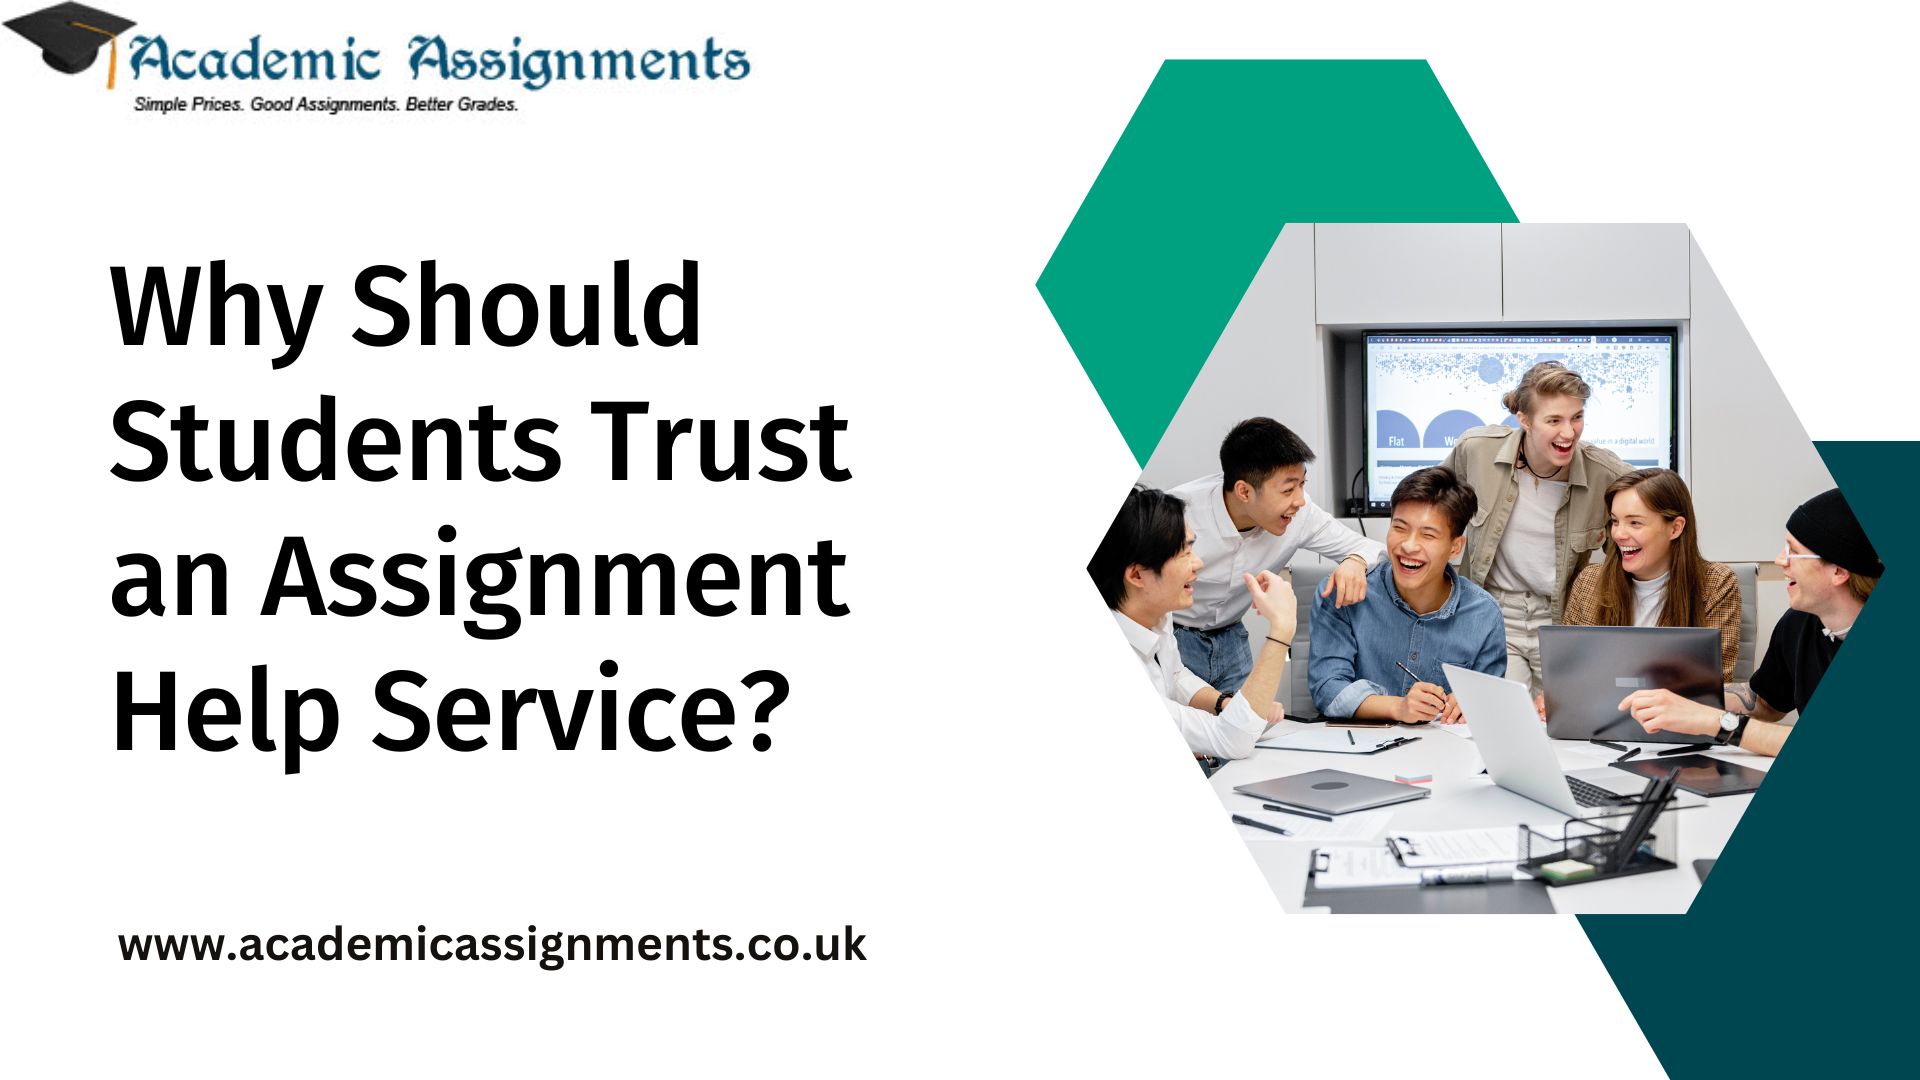 Why Should Students Trust an Assignment Help Service